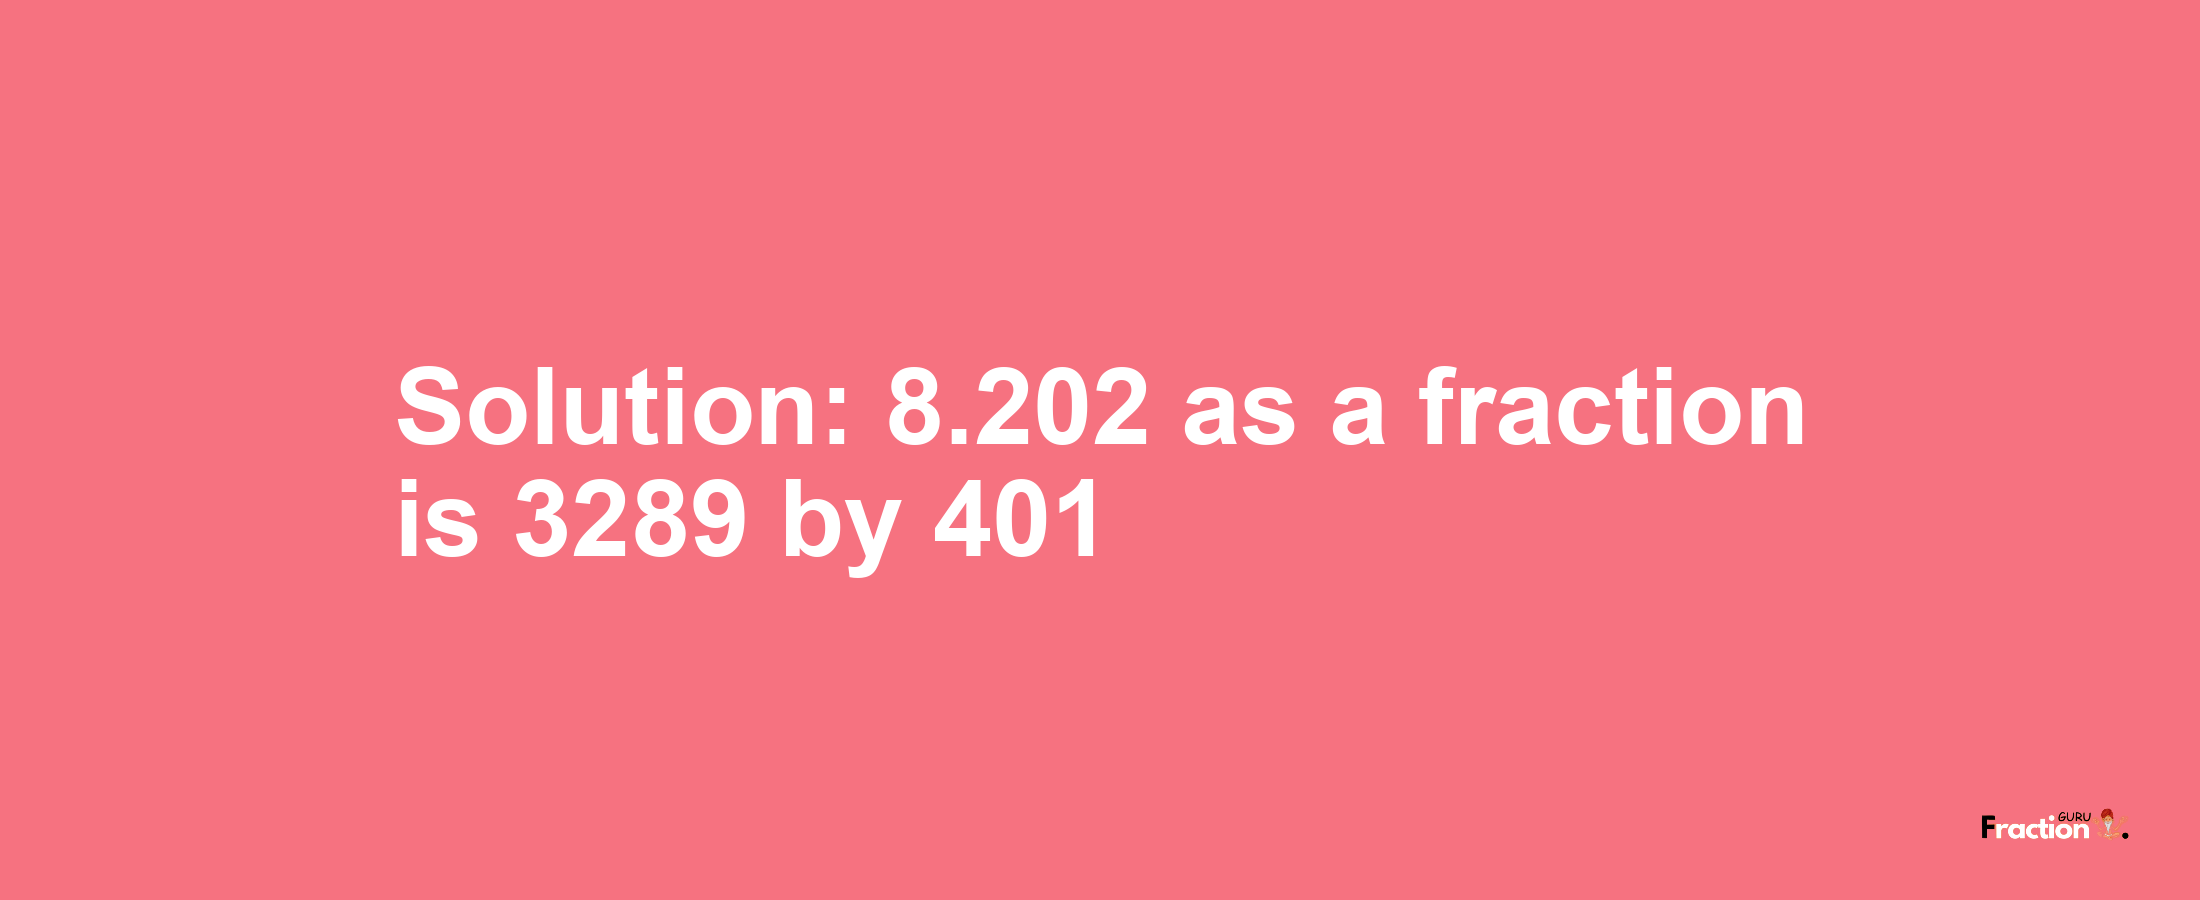 Solution:8.202 as a fraction is 3289/401